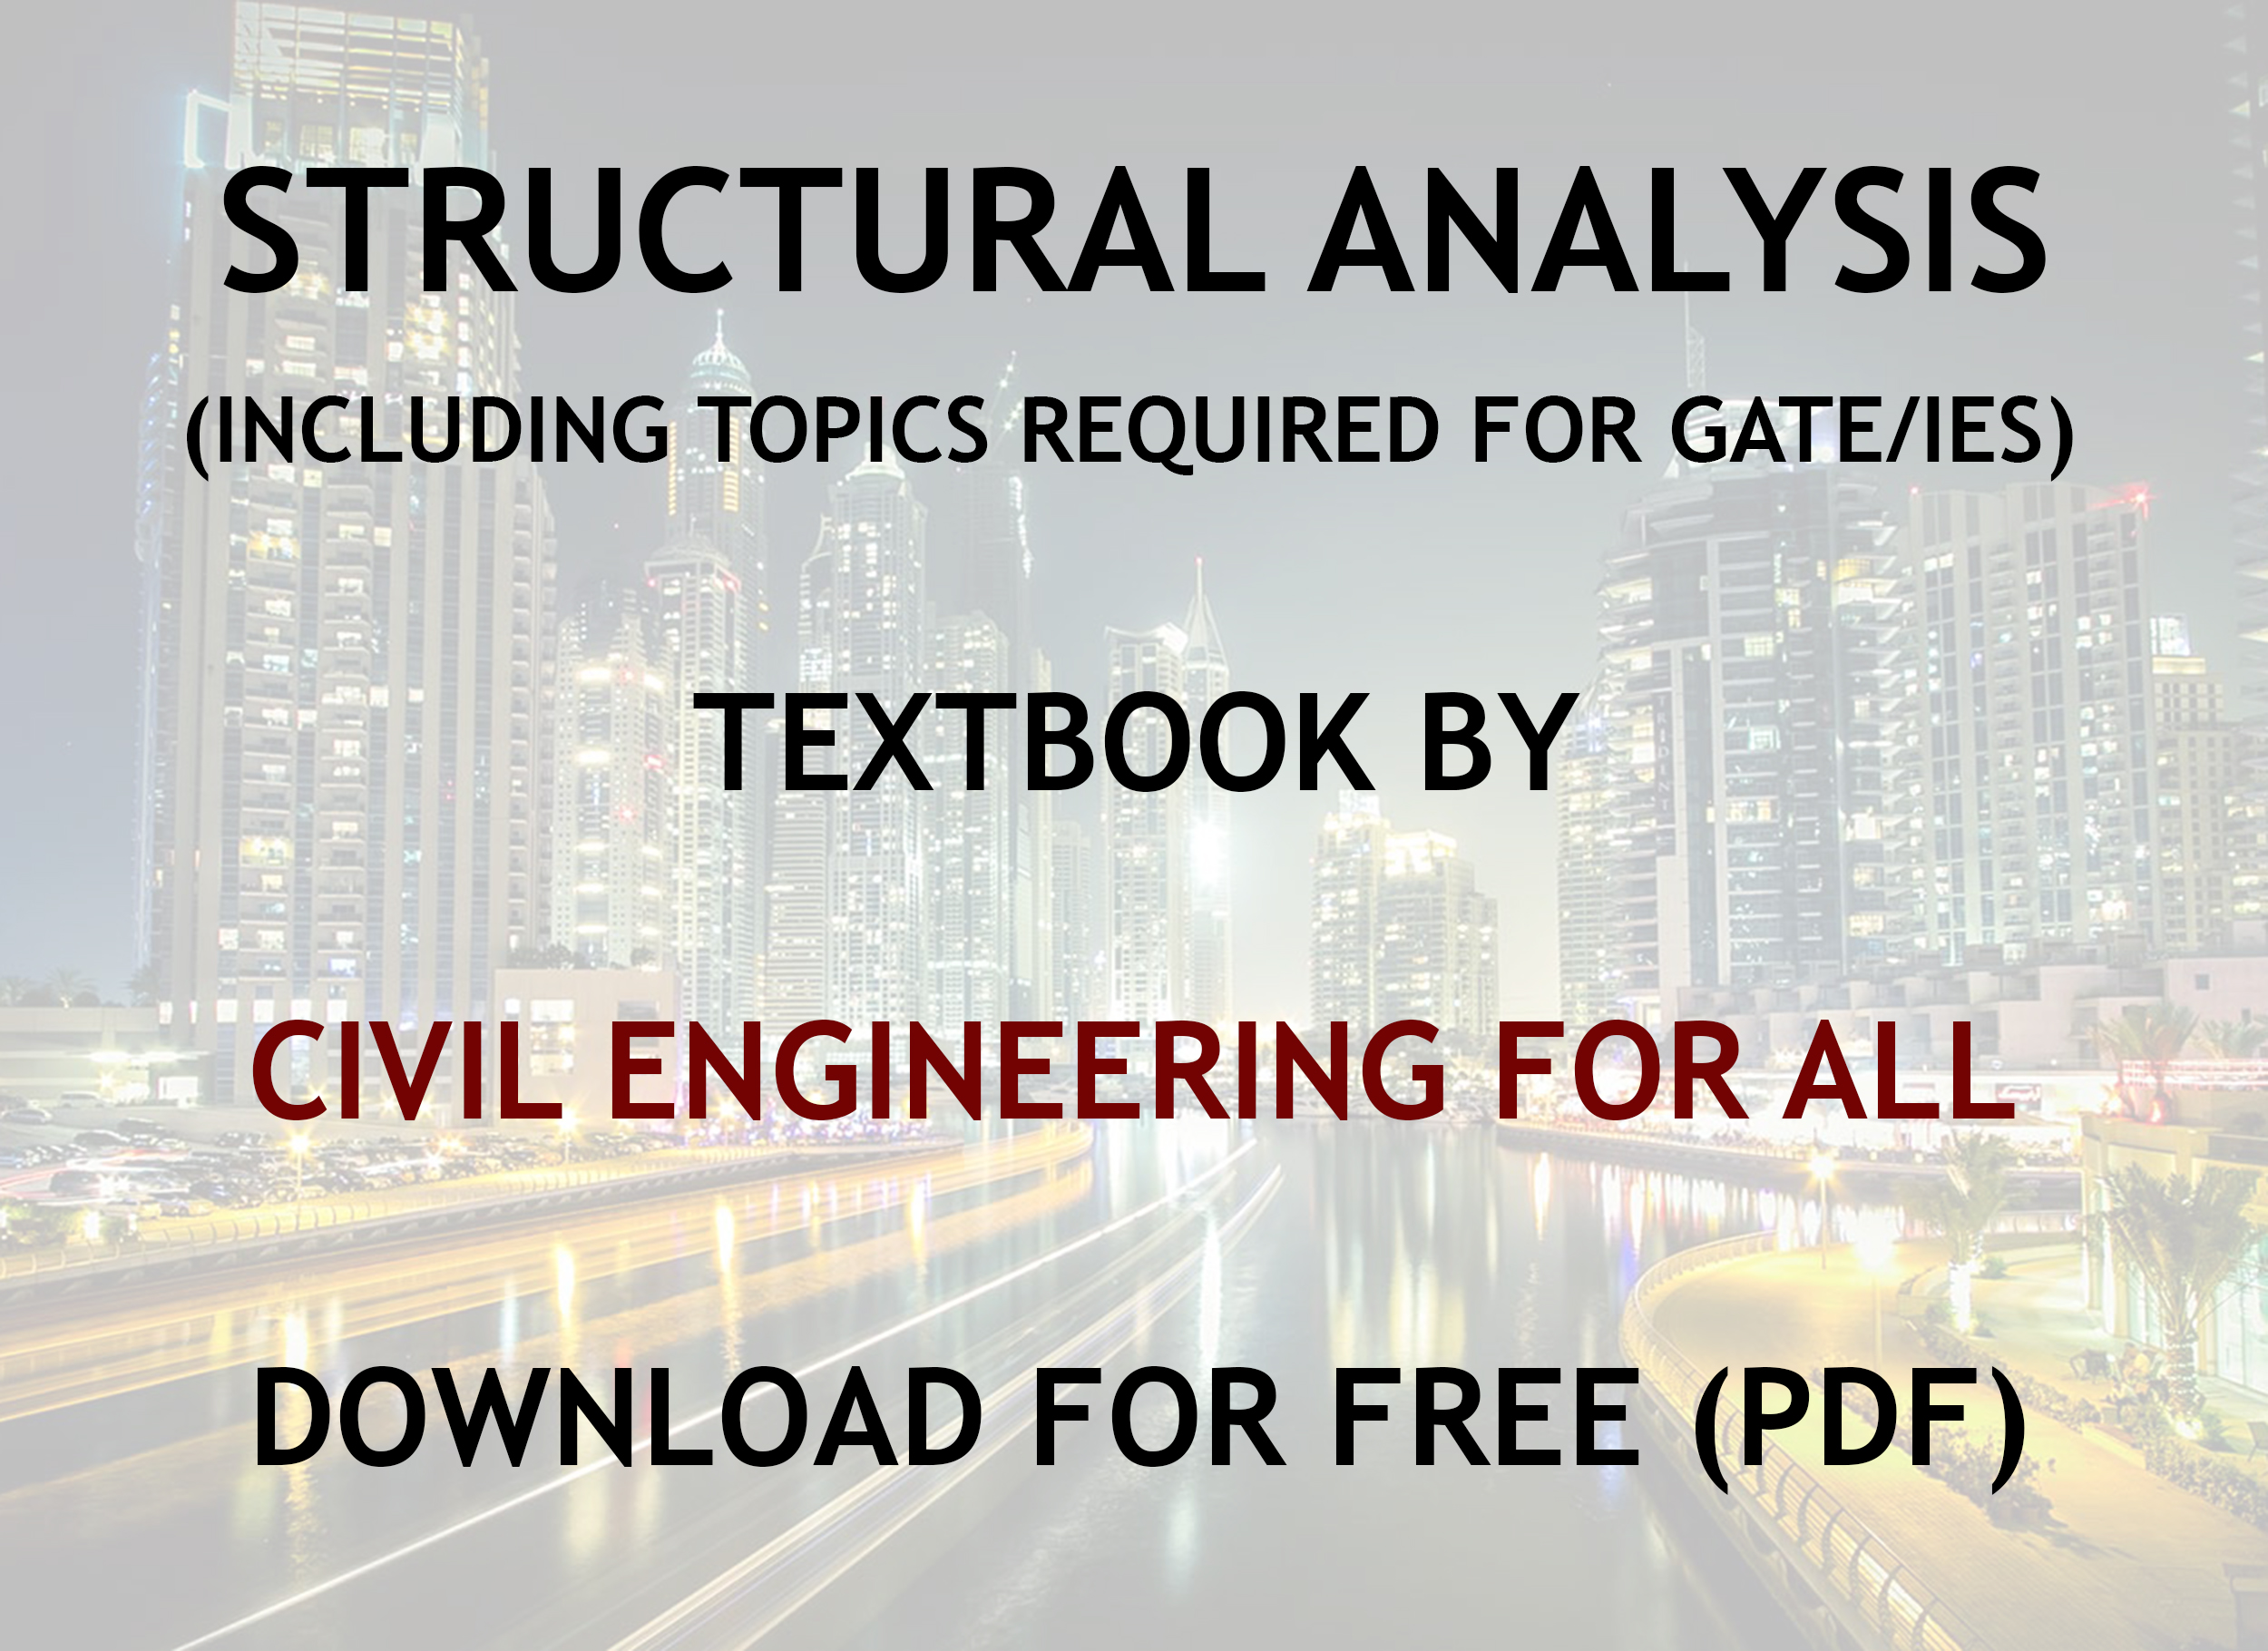 Structural Analysis Textbook By CivilEnggForAll